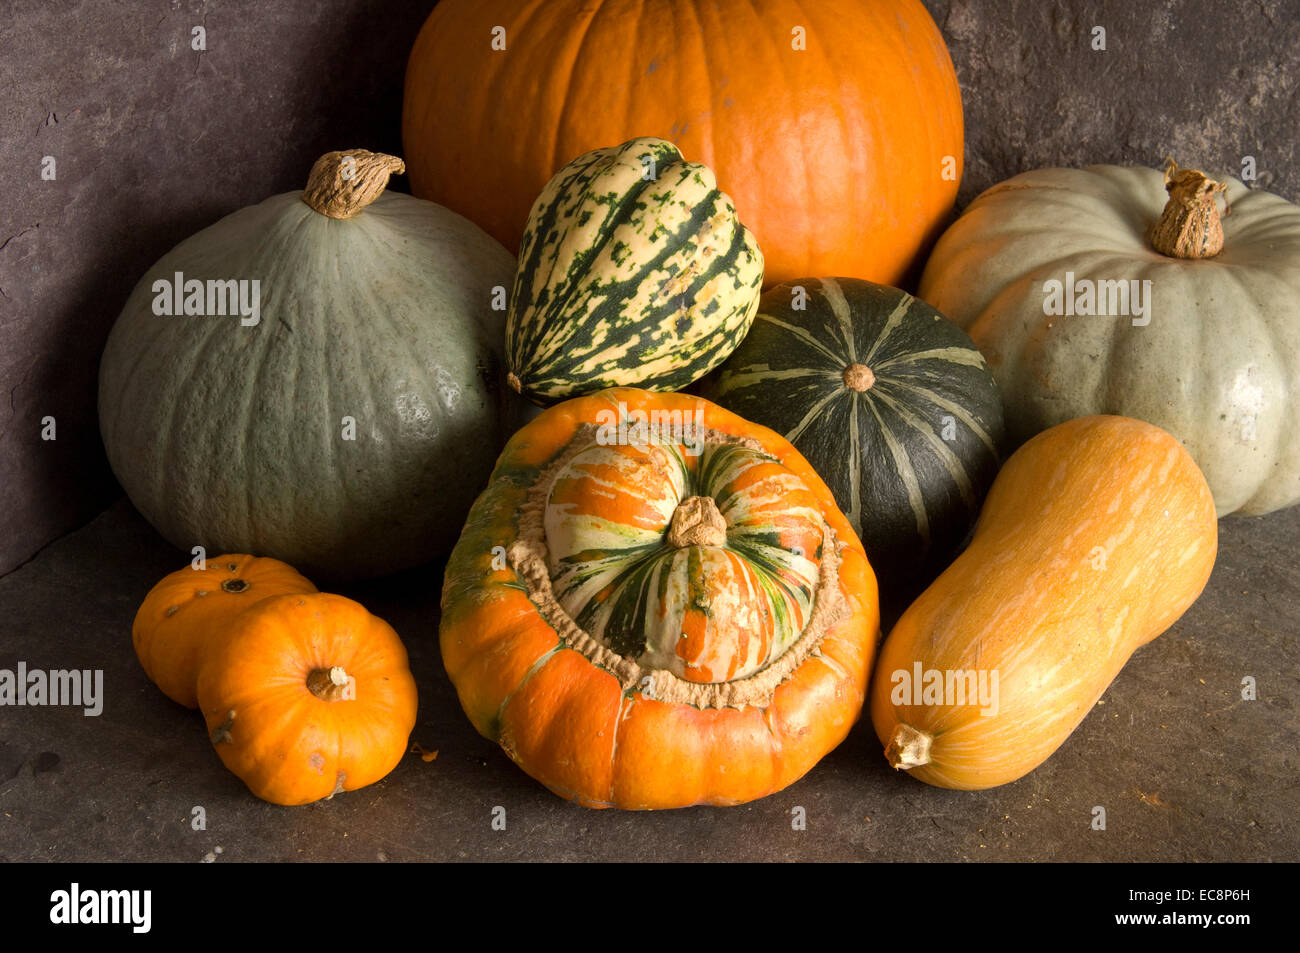 Pumpkins and squashes. Stock Photo